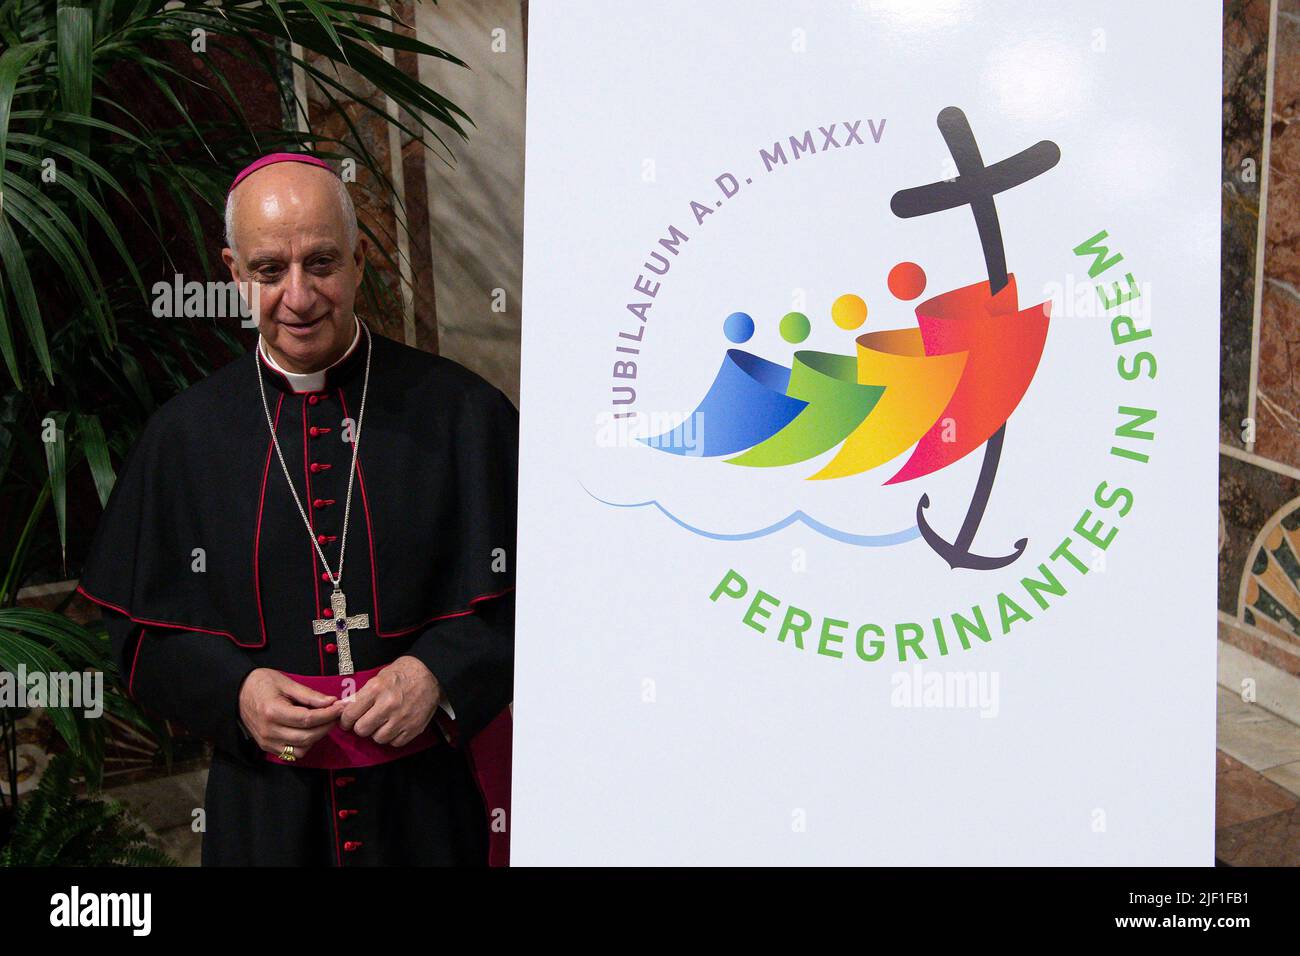 Vatican City, Vatican. 28 June 2022. Rino Fisichella Pro-prefect of the Dicastery for Evangelization, poses with the logo during during the presentation of the logo of the Jubilee 2025, MMXXV Pilgrims of Hope, at the Regia Hall of the Apostolic Palace.  (Photo by Vatican Media). Credit: Vatican Media/Picciarella/Alamy Live News Stock Photo